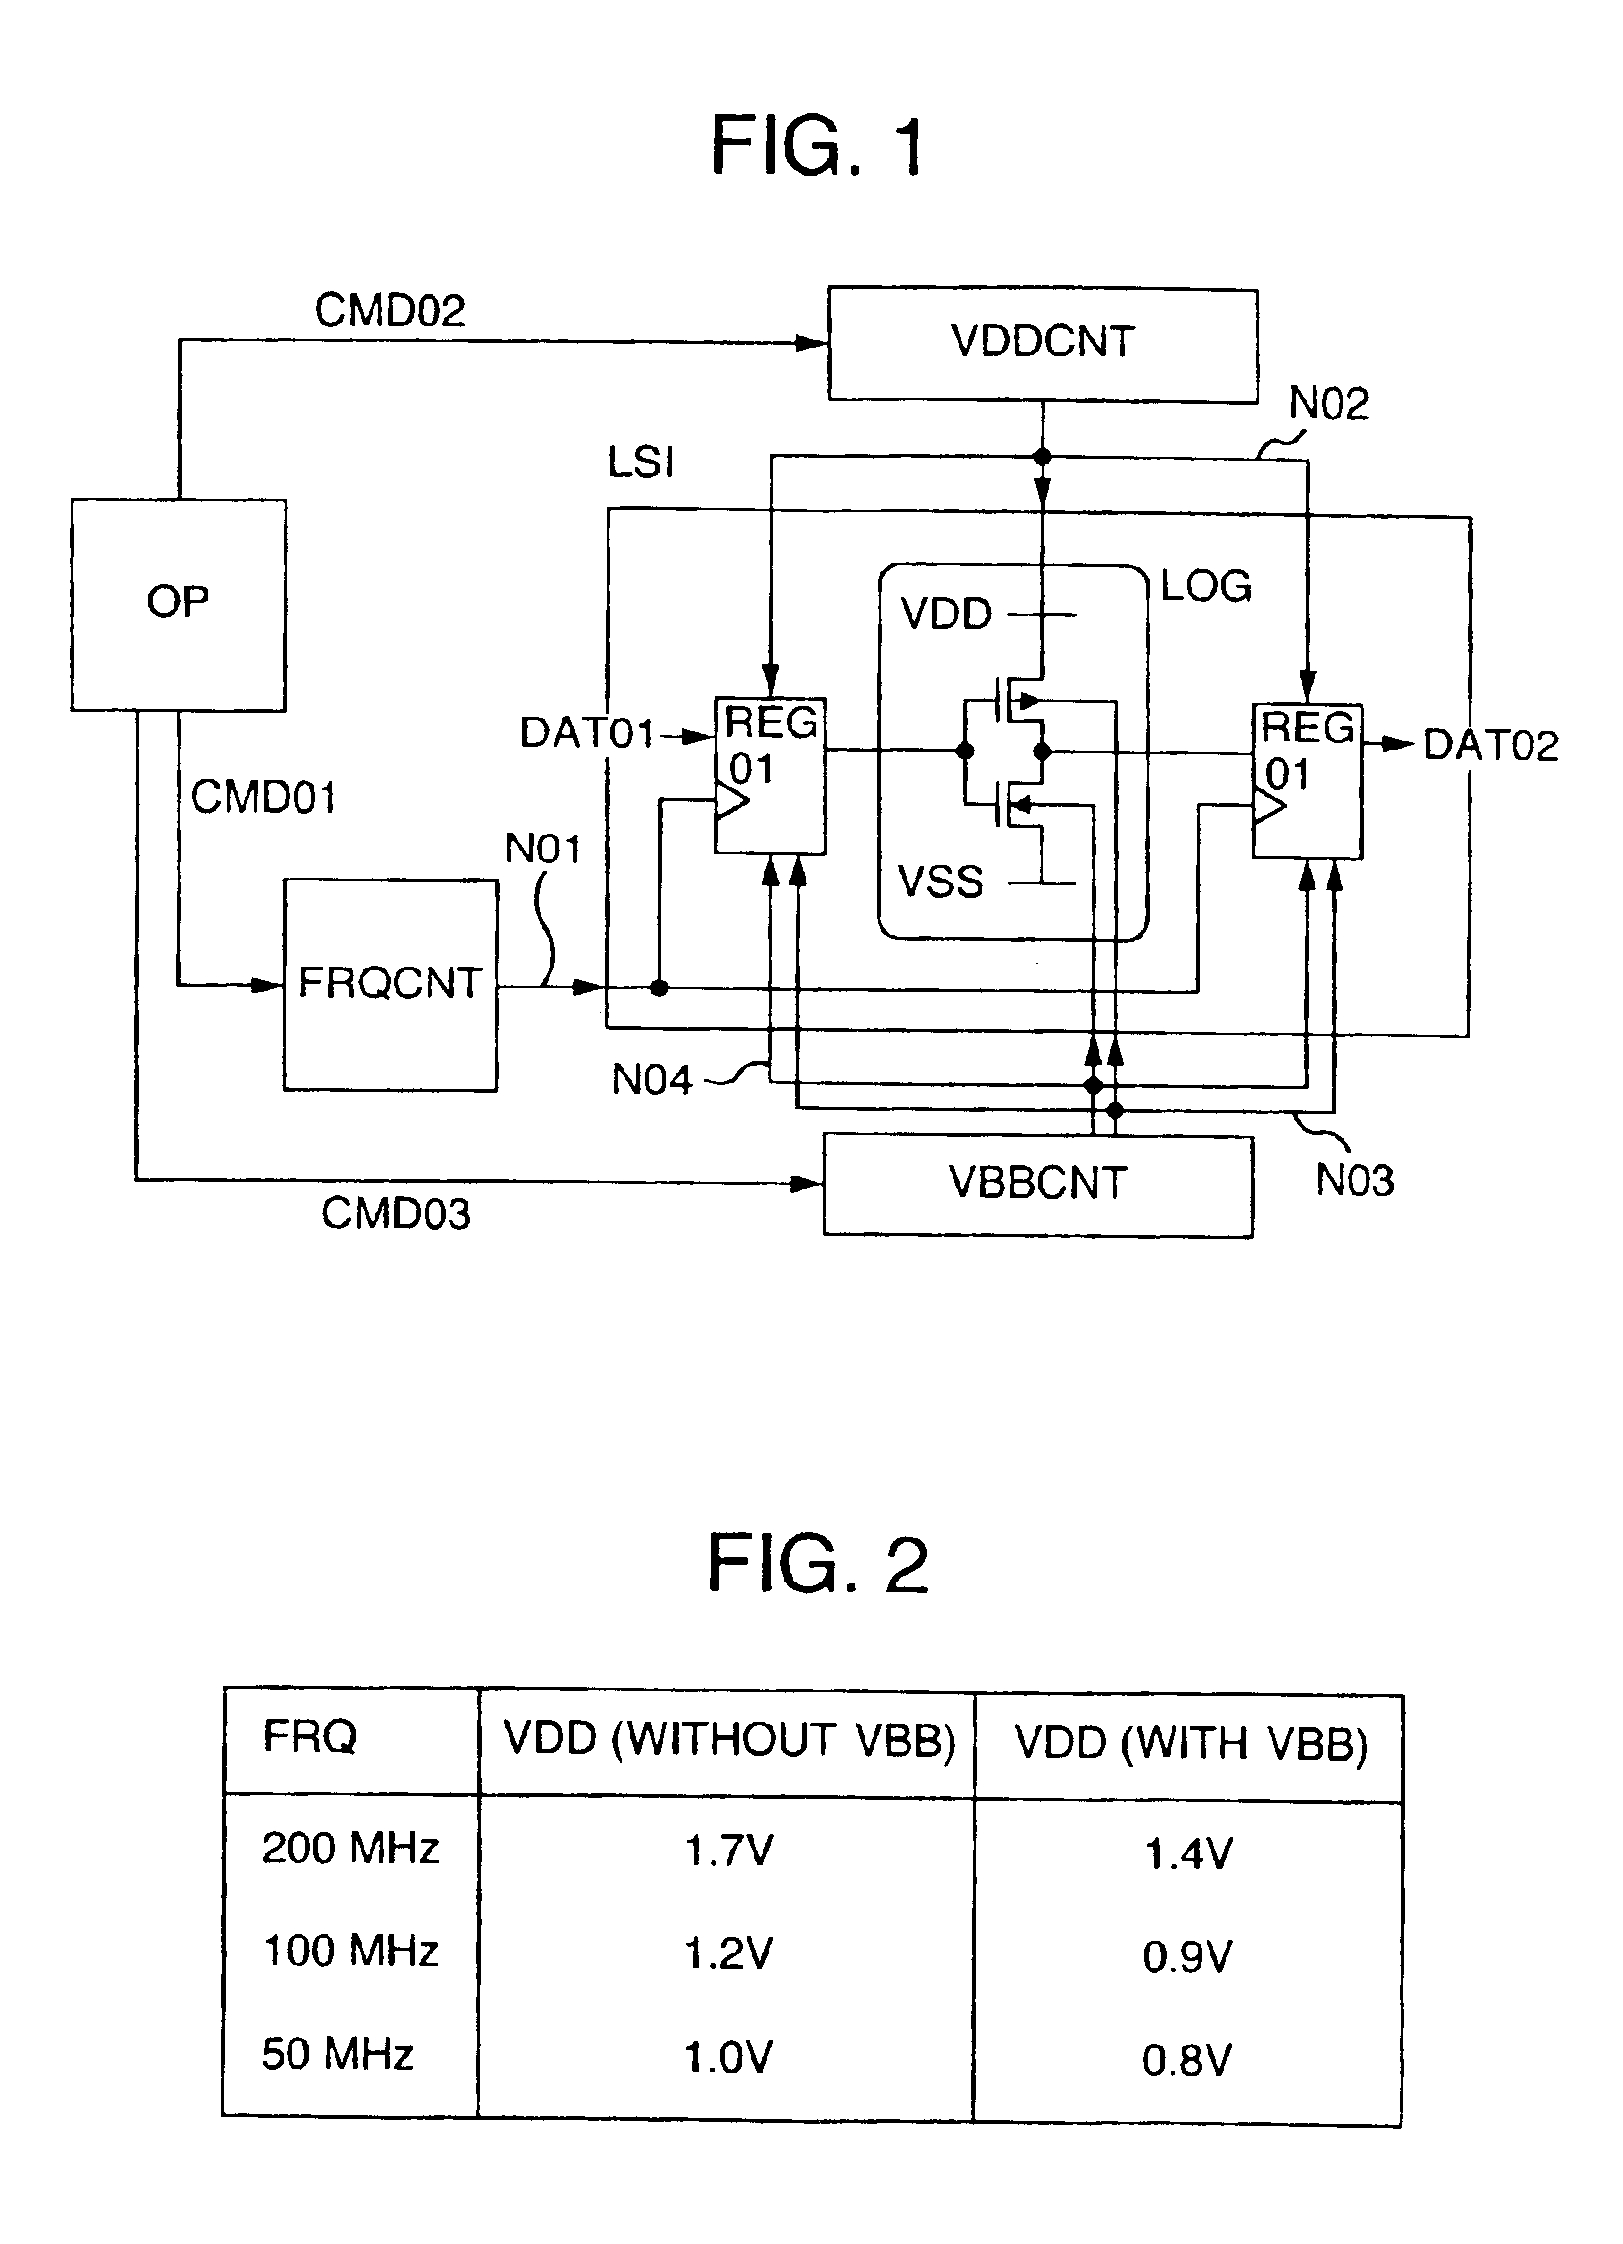 Semiconductor integrated circuit device in which operating frequency, supply voltage and substrate bias voltage are controllable to reduce power consumption